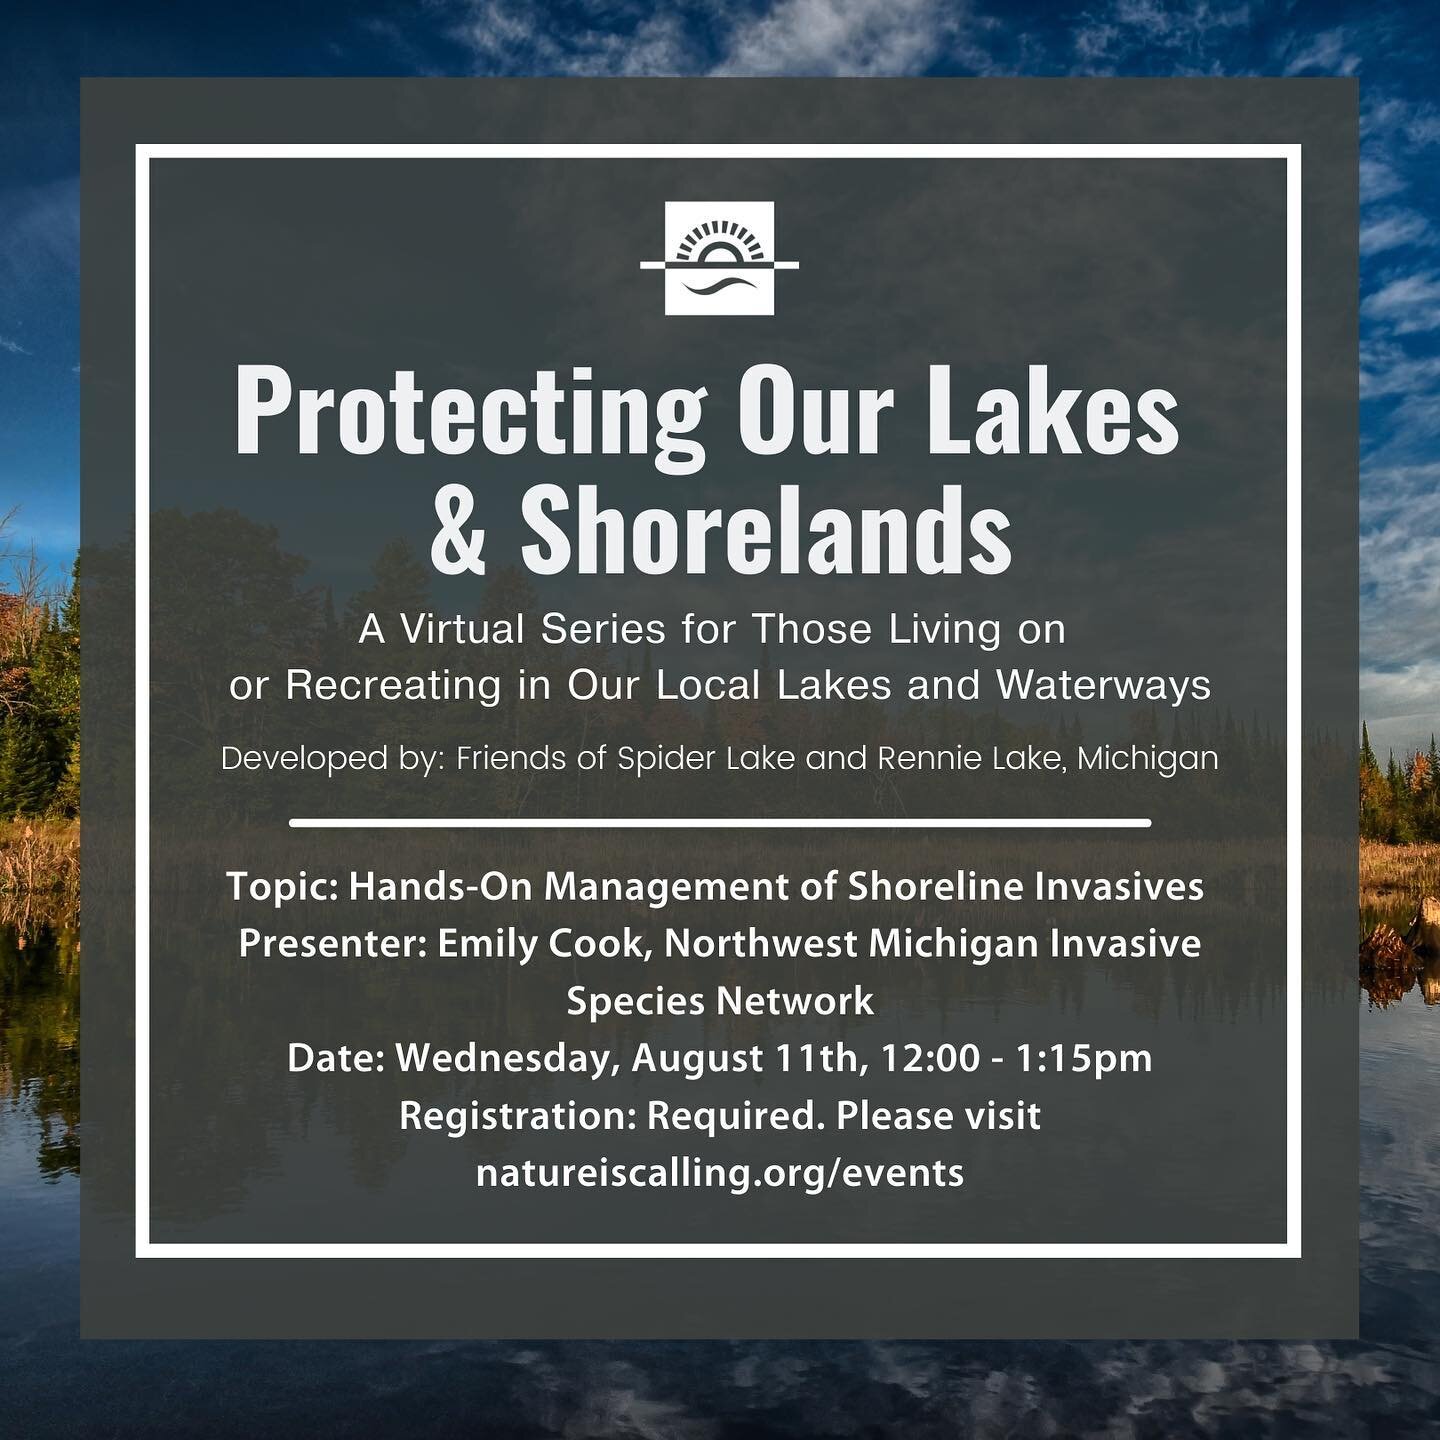 Don't miss the third event in this FREE virtual series: Hands-On Management of Shoreline Invasives!

Deep dive into shoreline invasive plant control (including native replacement suggestions) with Emily Cook from the Northwest Michigan Invasive Speci